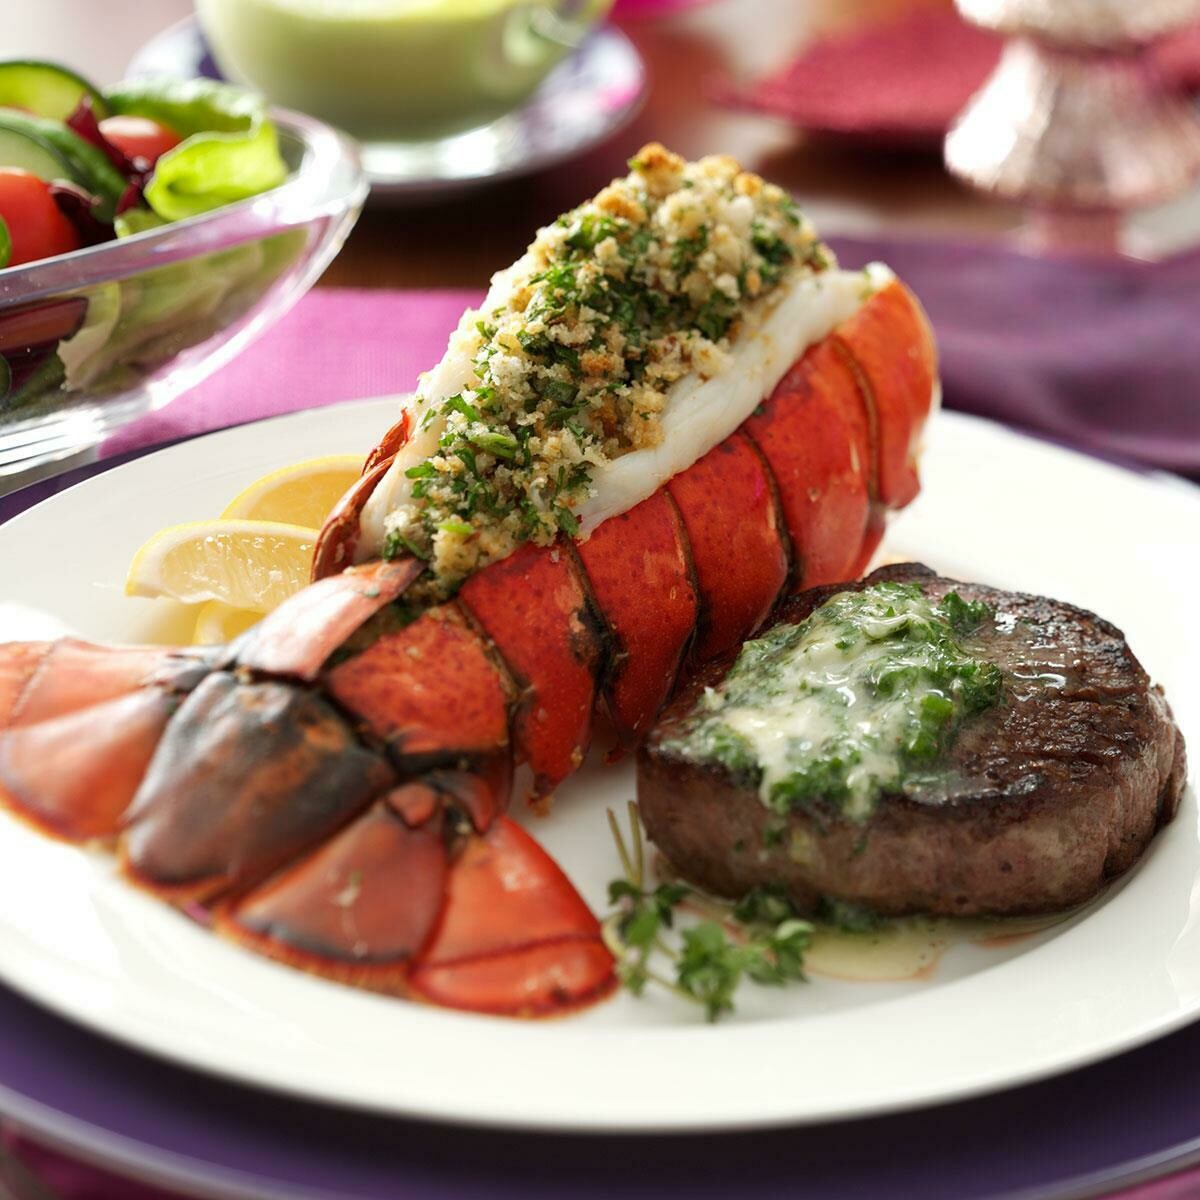 Surf & Turf Lobster Tail Meal Kit for 2!